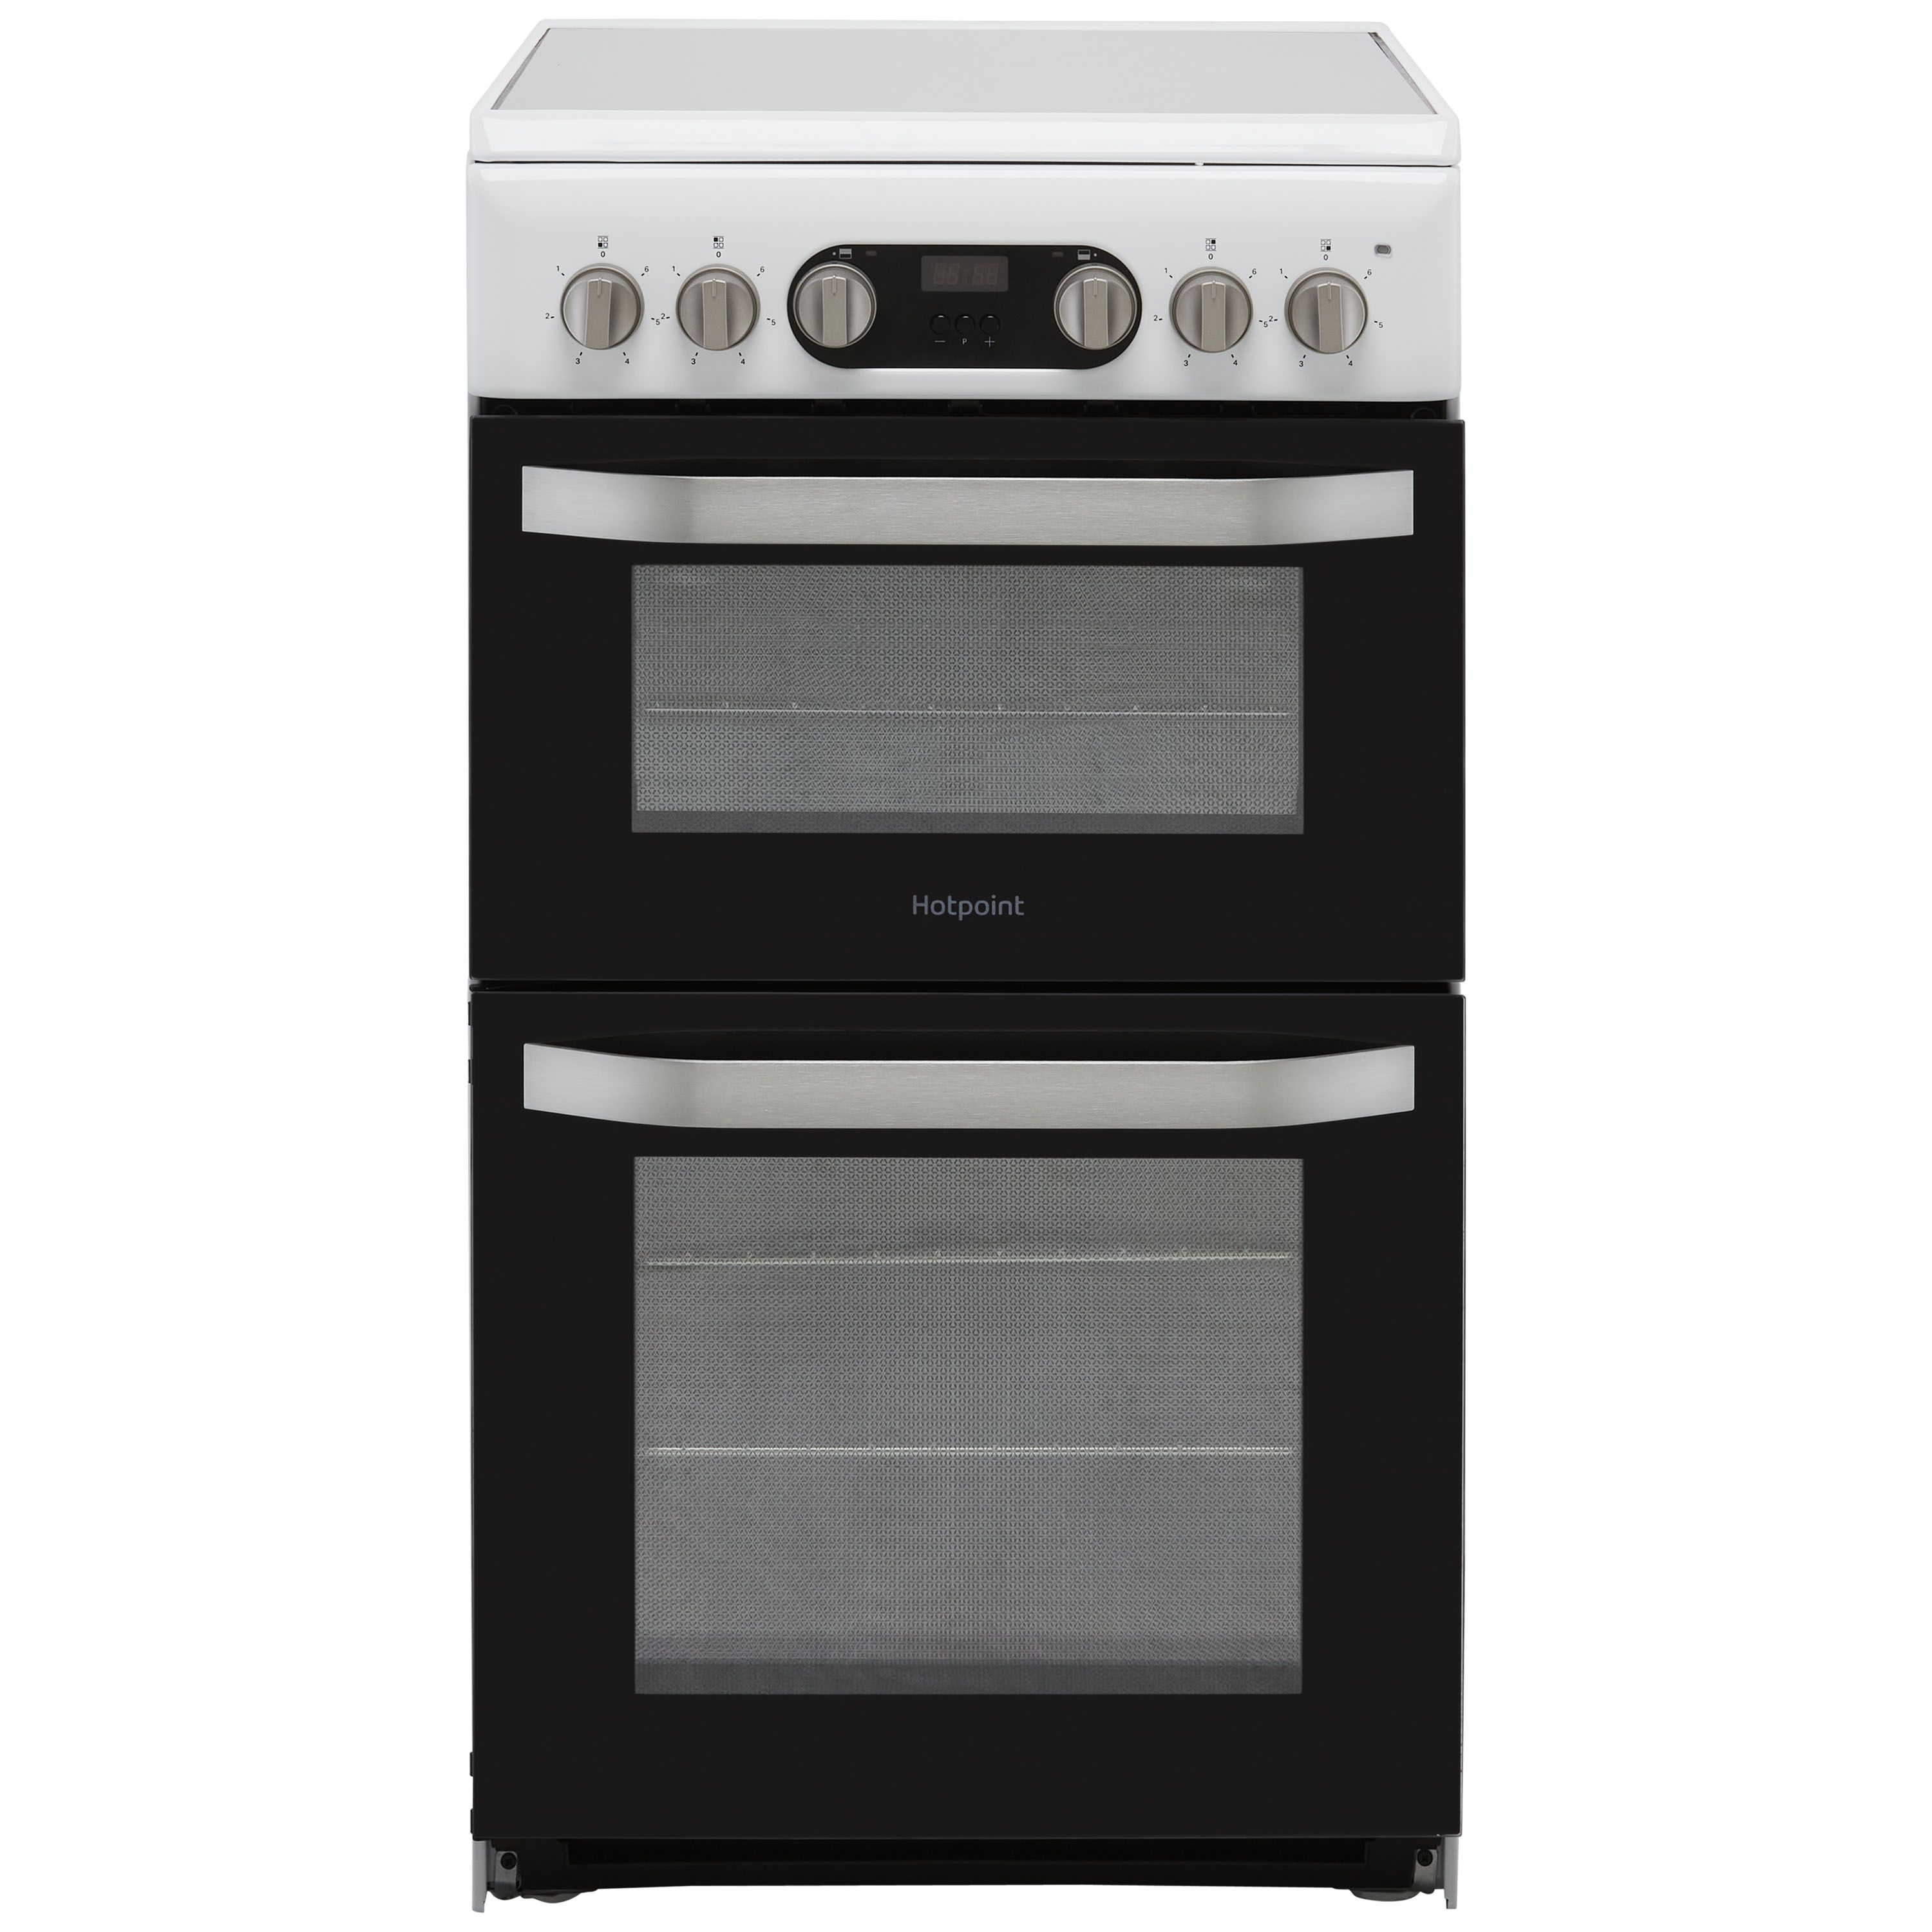 Hotpoint HD5V93CCW/UK_WH 50cm Double Electric Cooker with Ceramic Hob - White